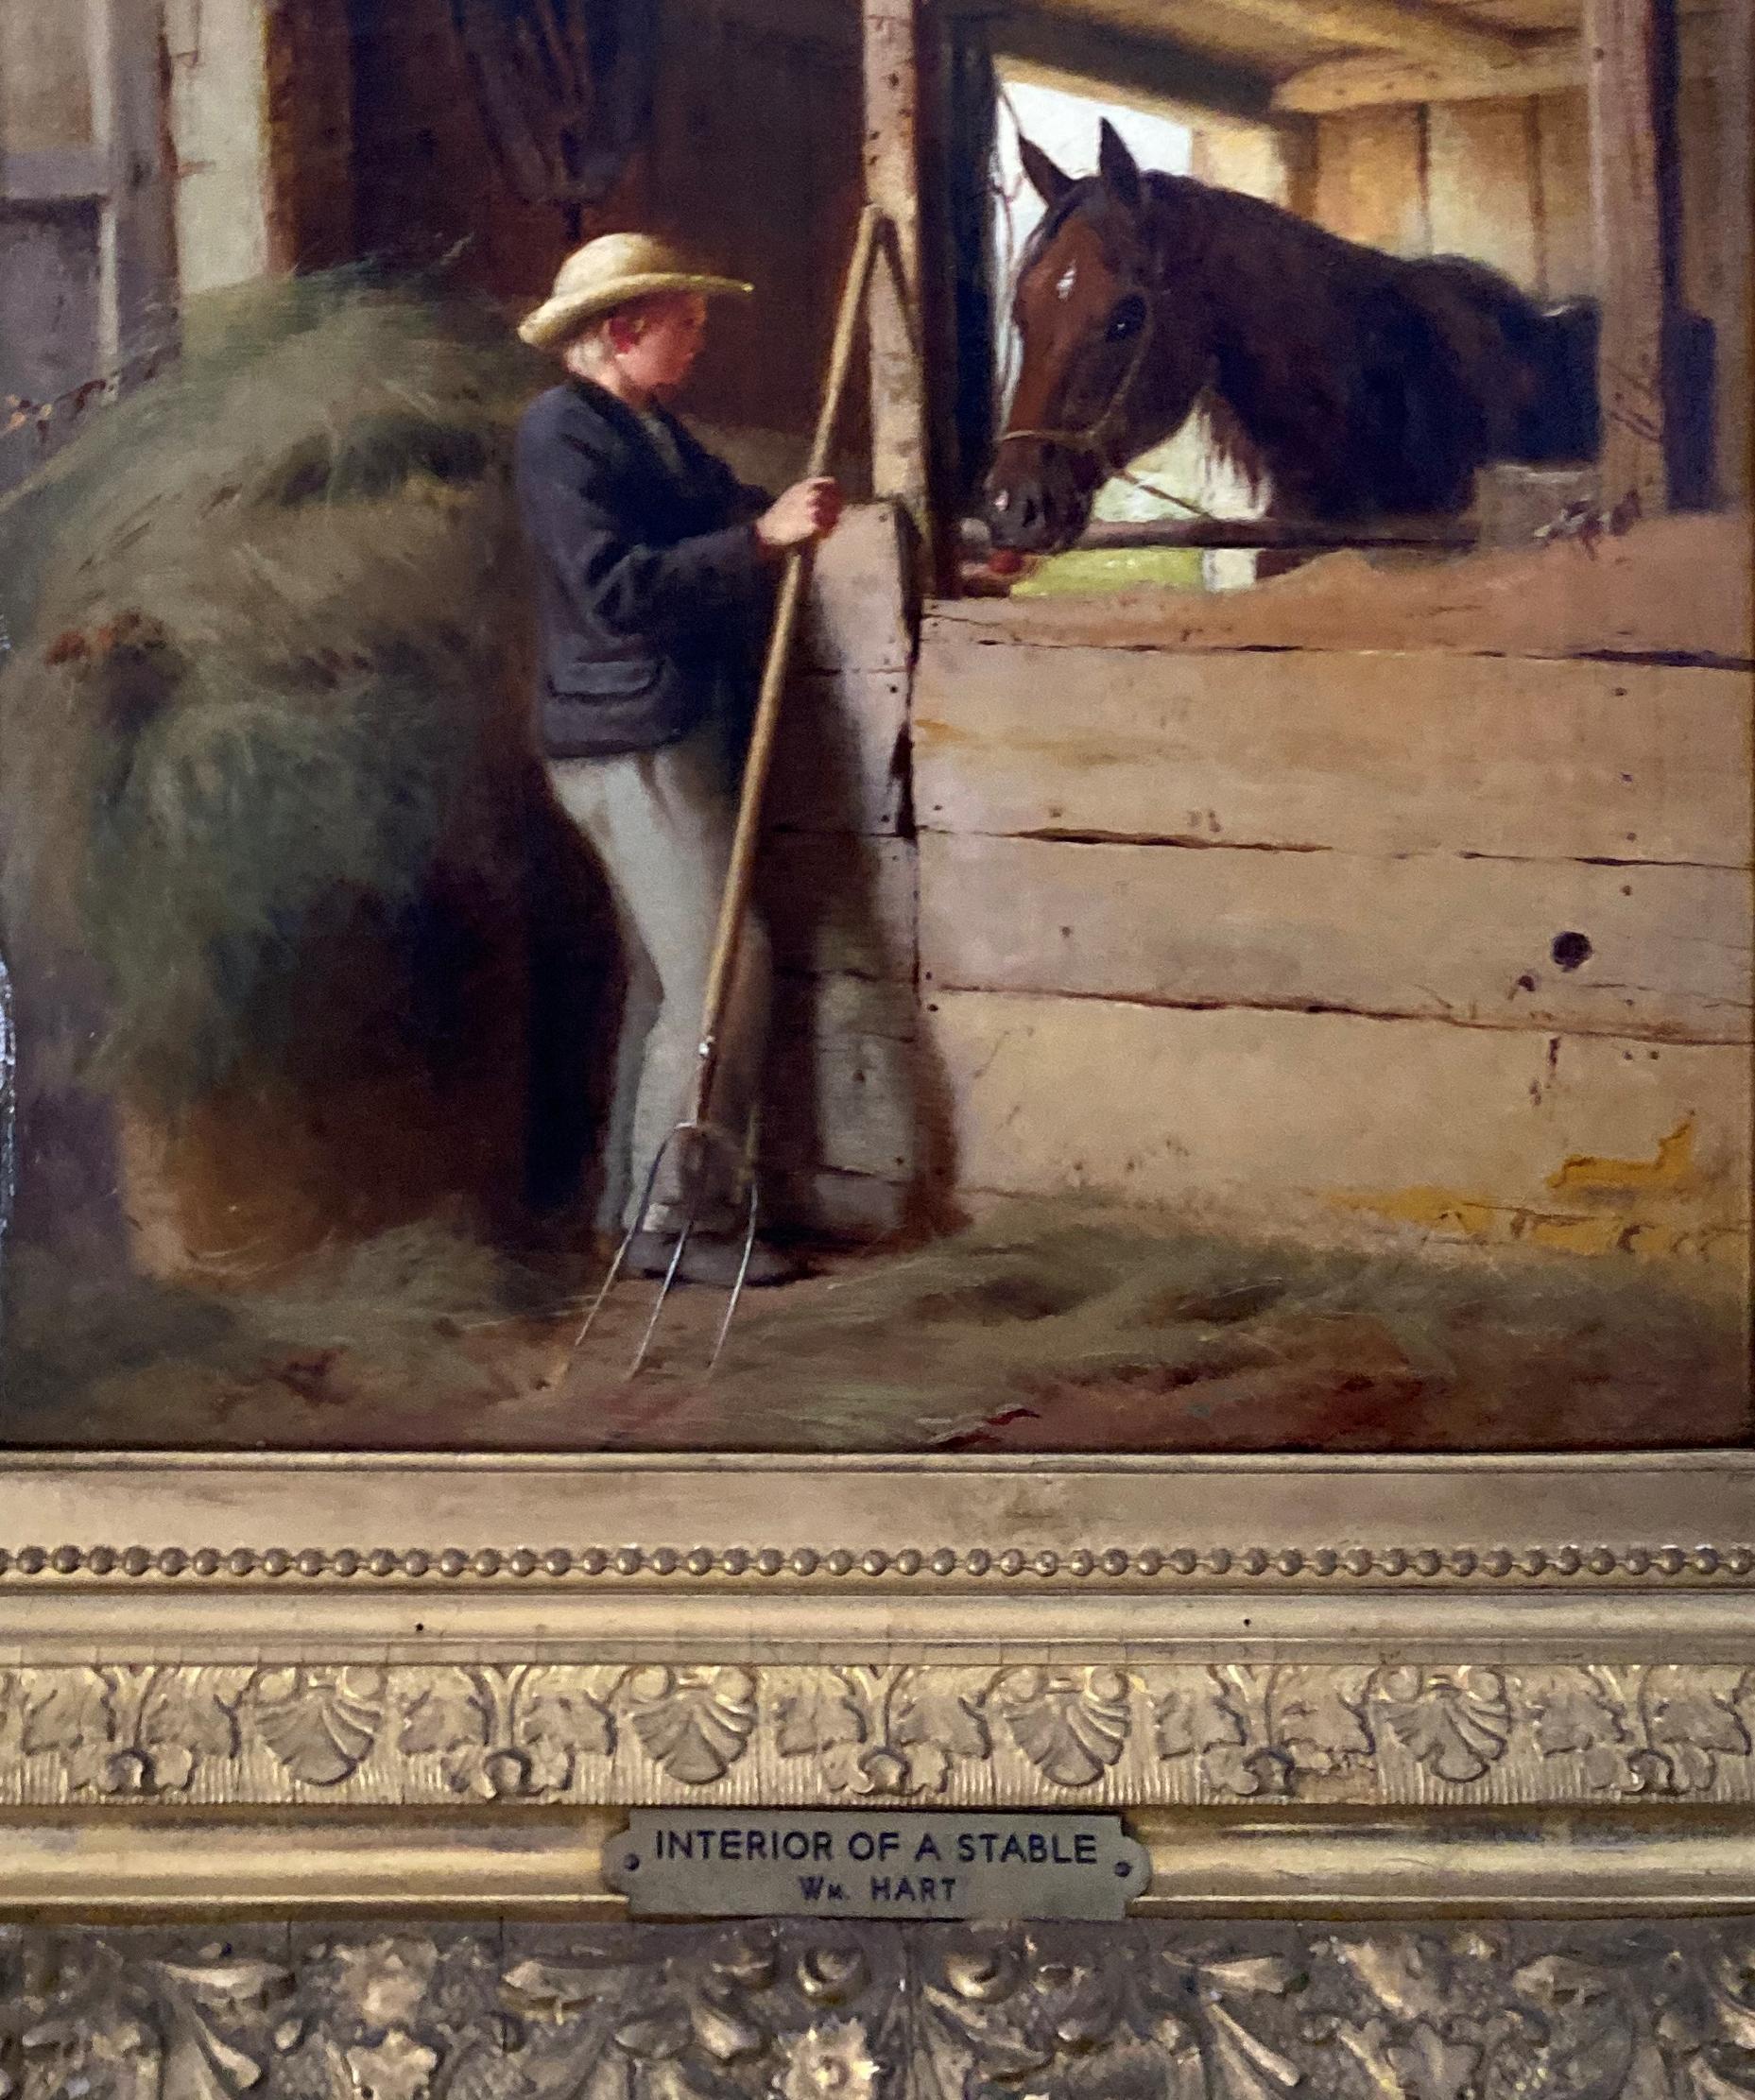 William M. Hart (1823 - 1894)
Interior of a Stable
Oil on canvas
17 x 12 inches
 
Provenance
William Macbeth Gallery, New York
Mrs. Mabel Brady Garvan Collection
Christie's New York, Sporting Art, November 28, 1995, Lot 116
Ann Carter Stonesifer,